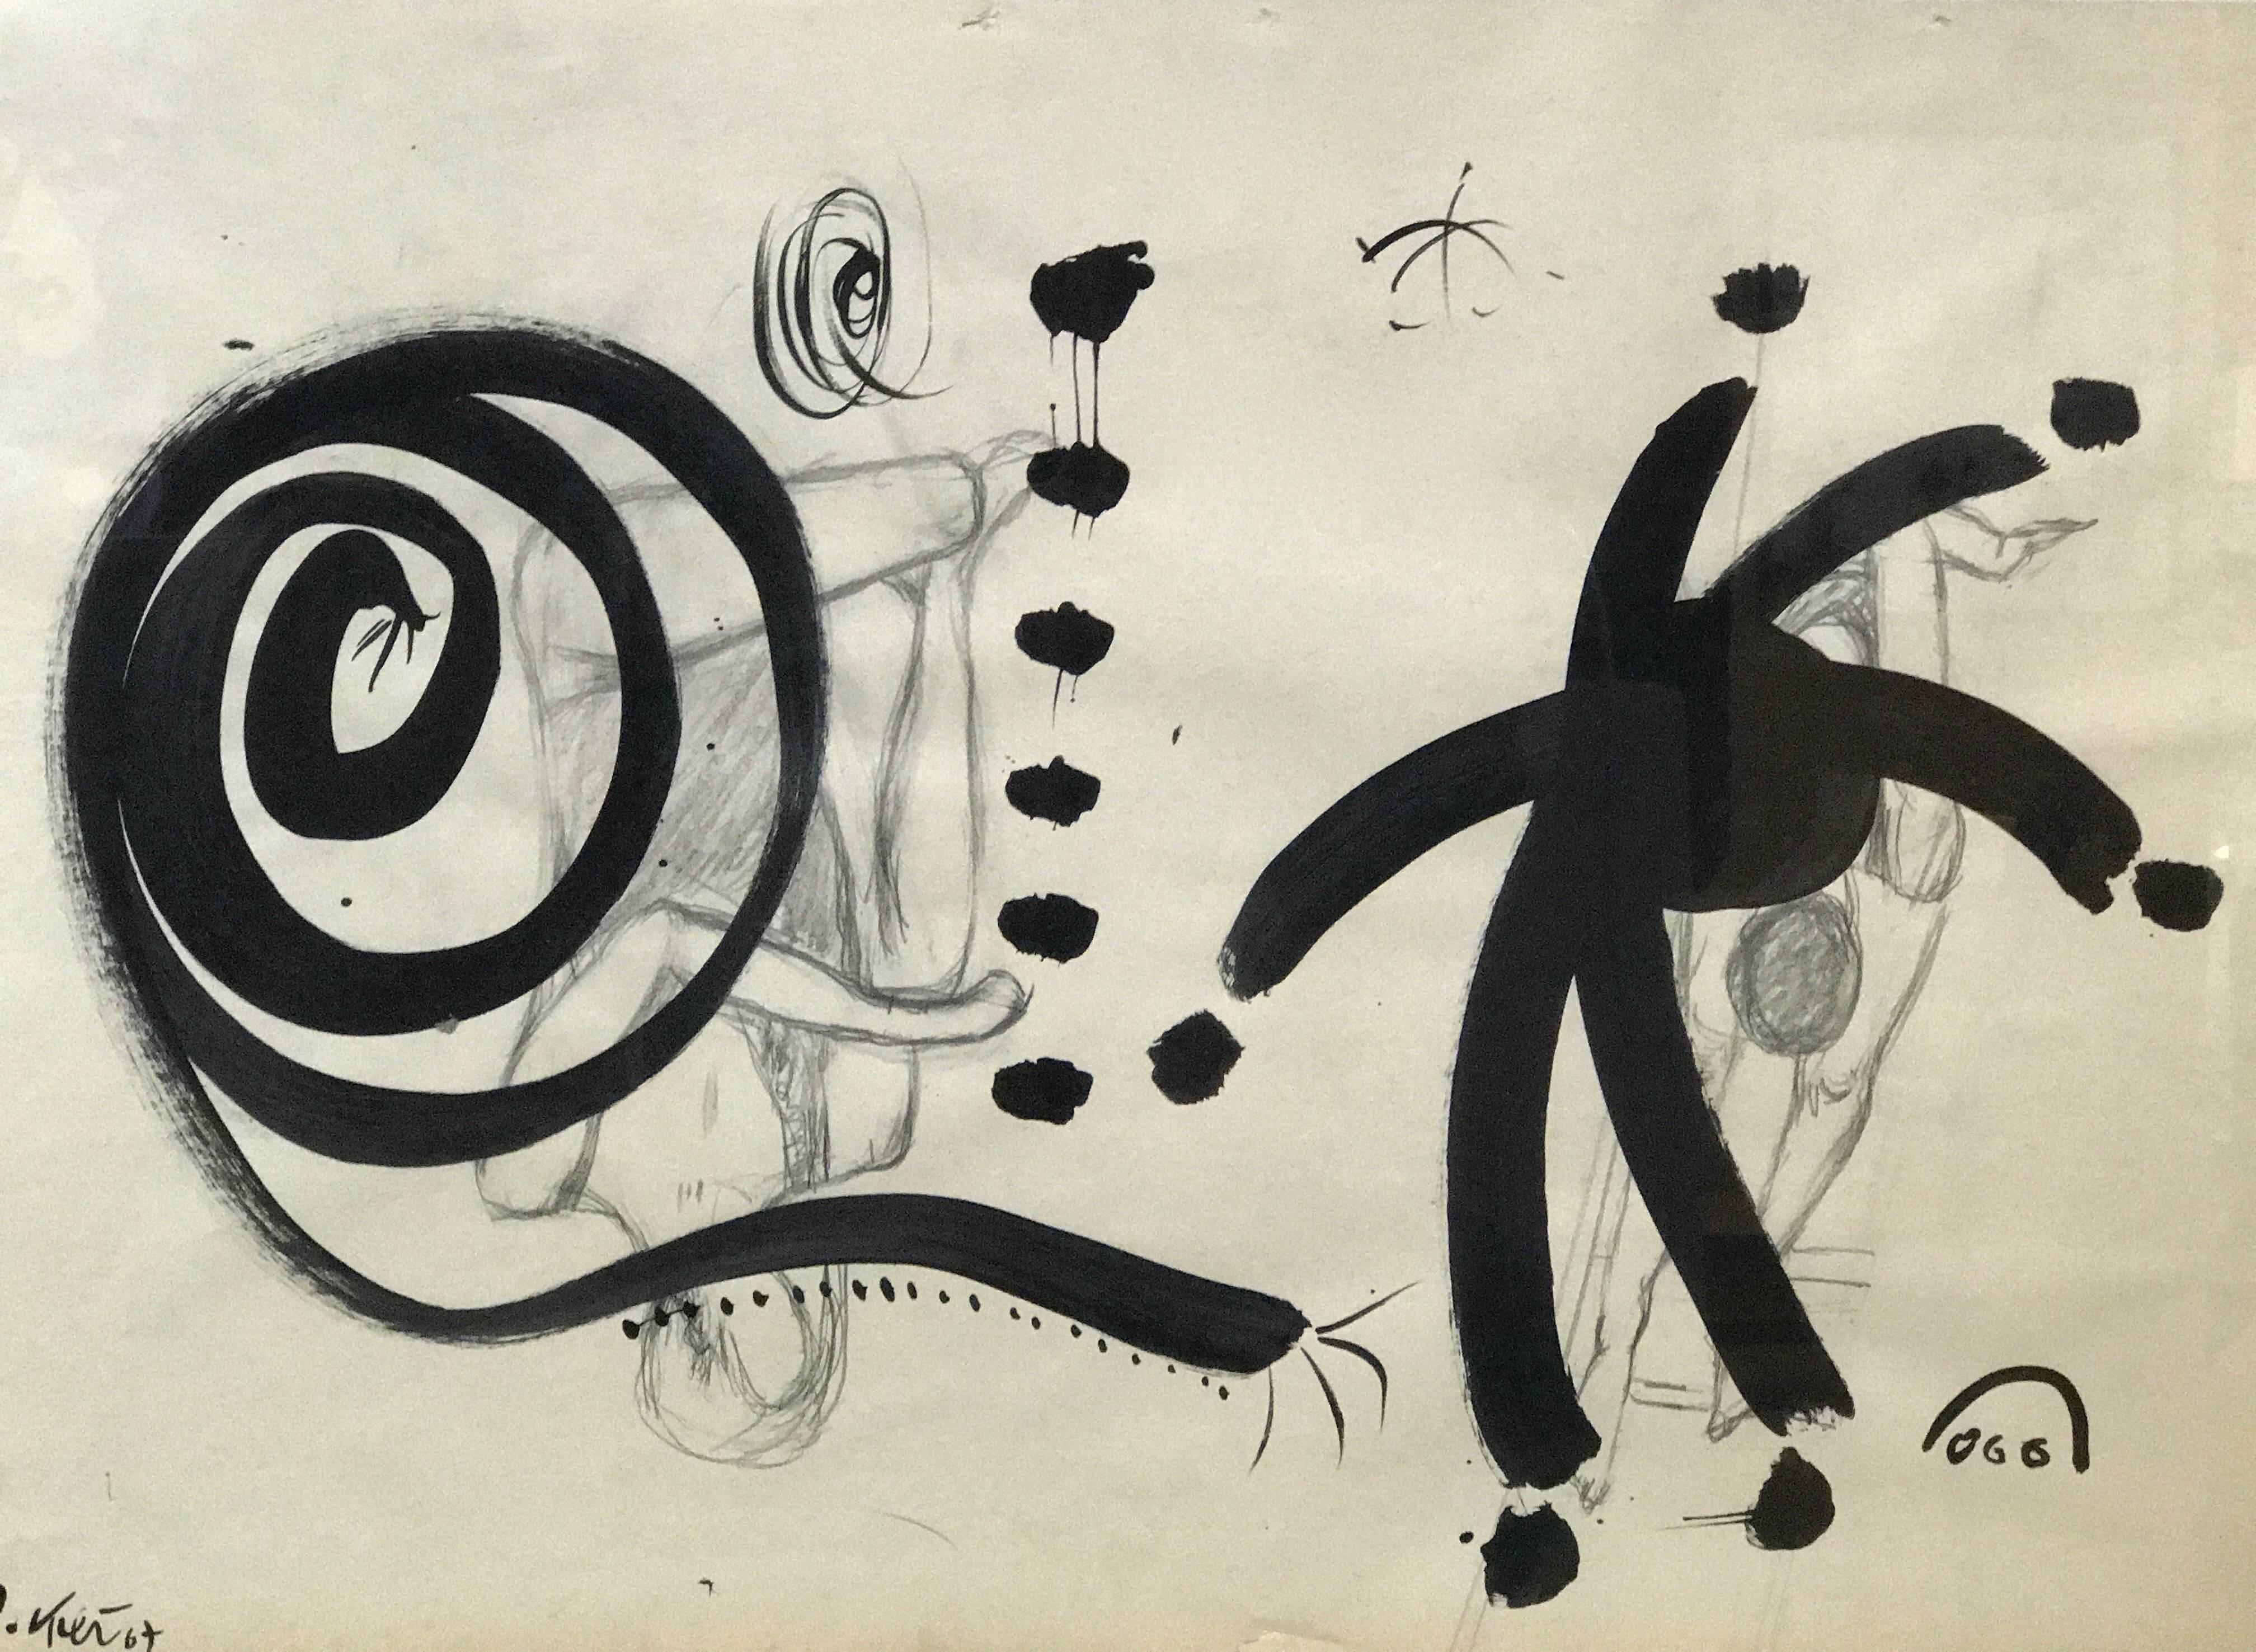 Abstract painting in acrylic on paper, titled 'Omaje to my friend Miro', painted in 1967 by Peter Robert Keil. Signed on the back "Peter Keil Studio Palma, 1967". The piece is in great vintage condition. "Certificate of